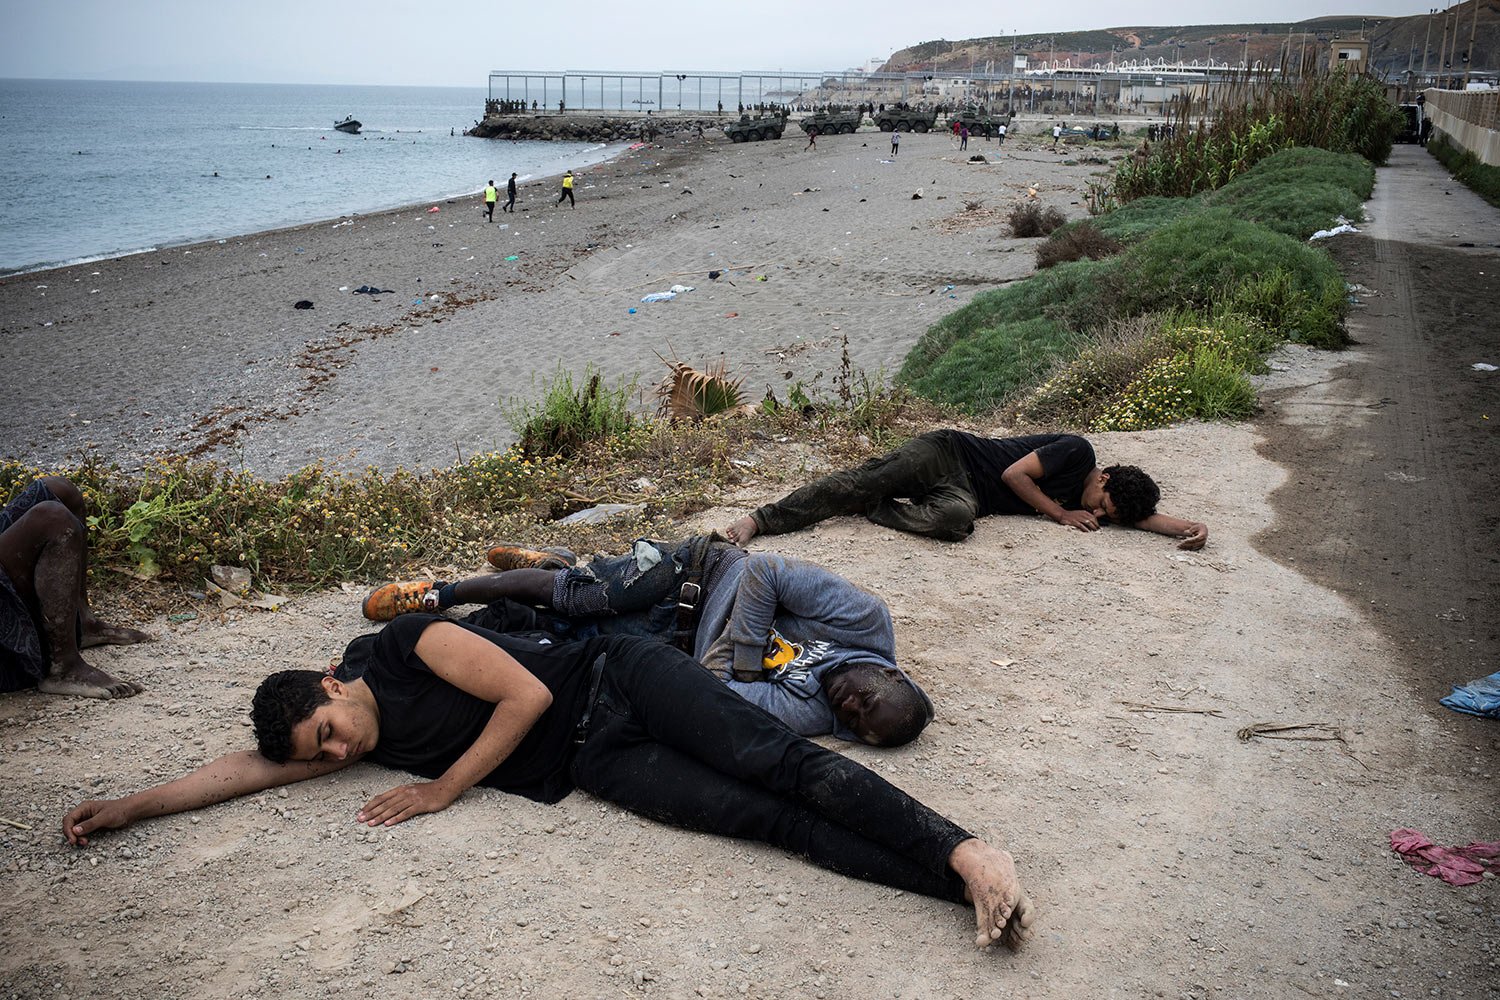  Men lie on the ground after arriving in the Spanish territory at the border of Morocco and Spain, at the Spanish enclave of Ceuta, May 18, 2021. (AP Photo/Javier Fergo) 